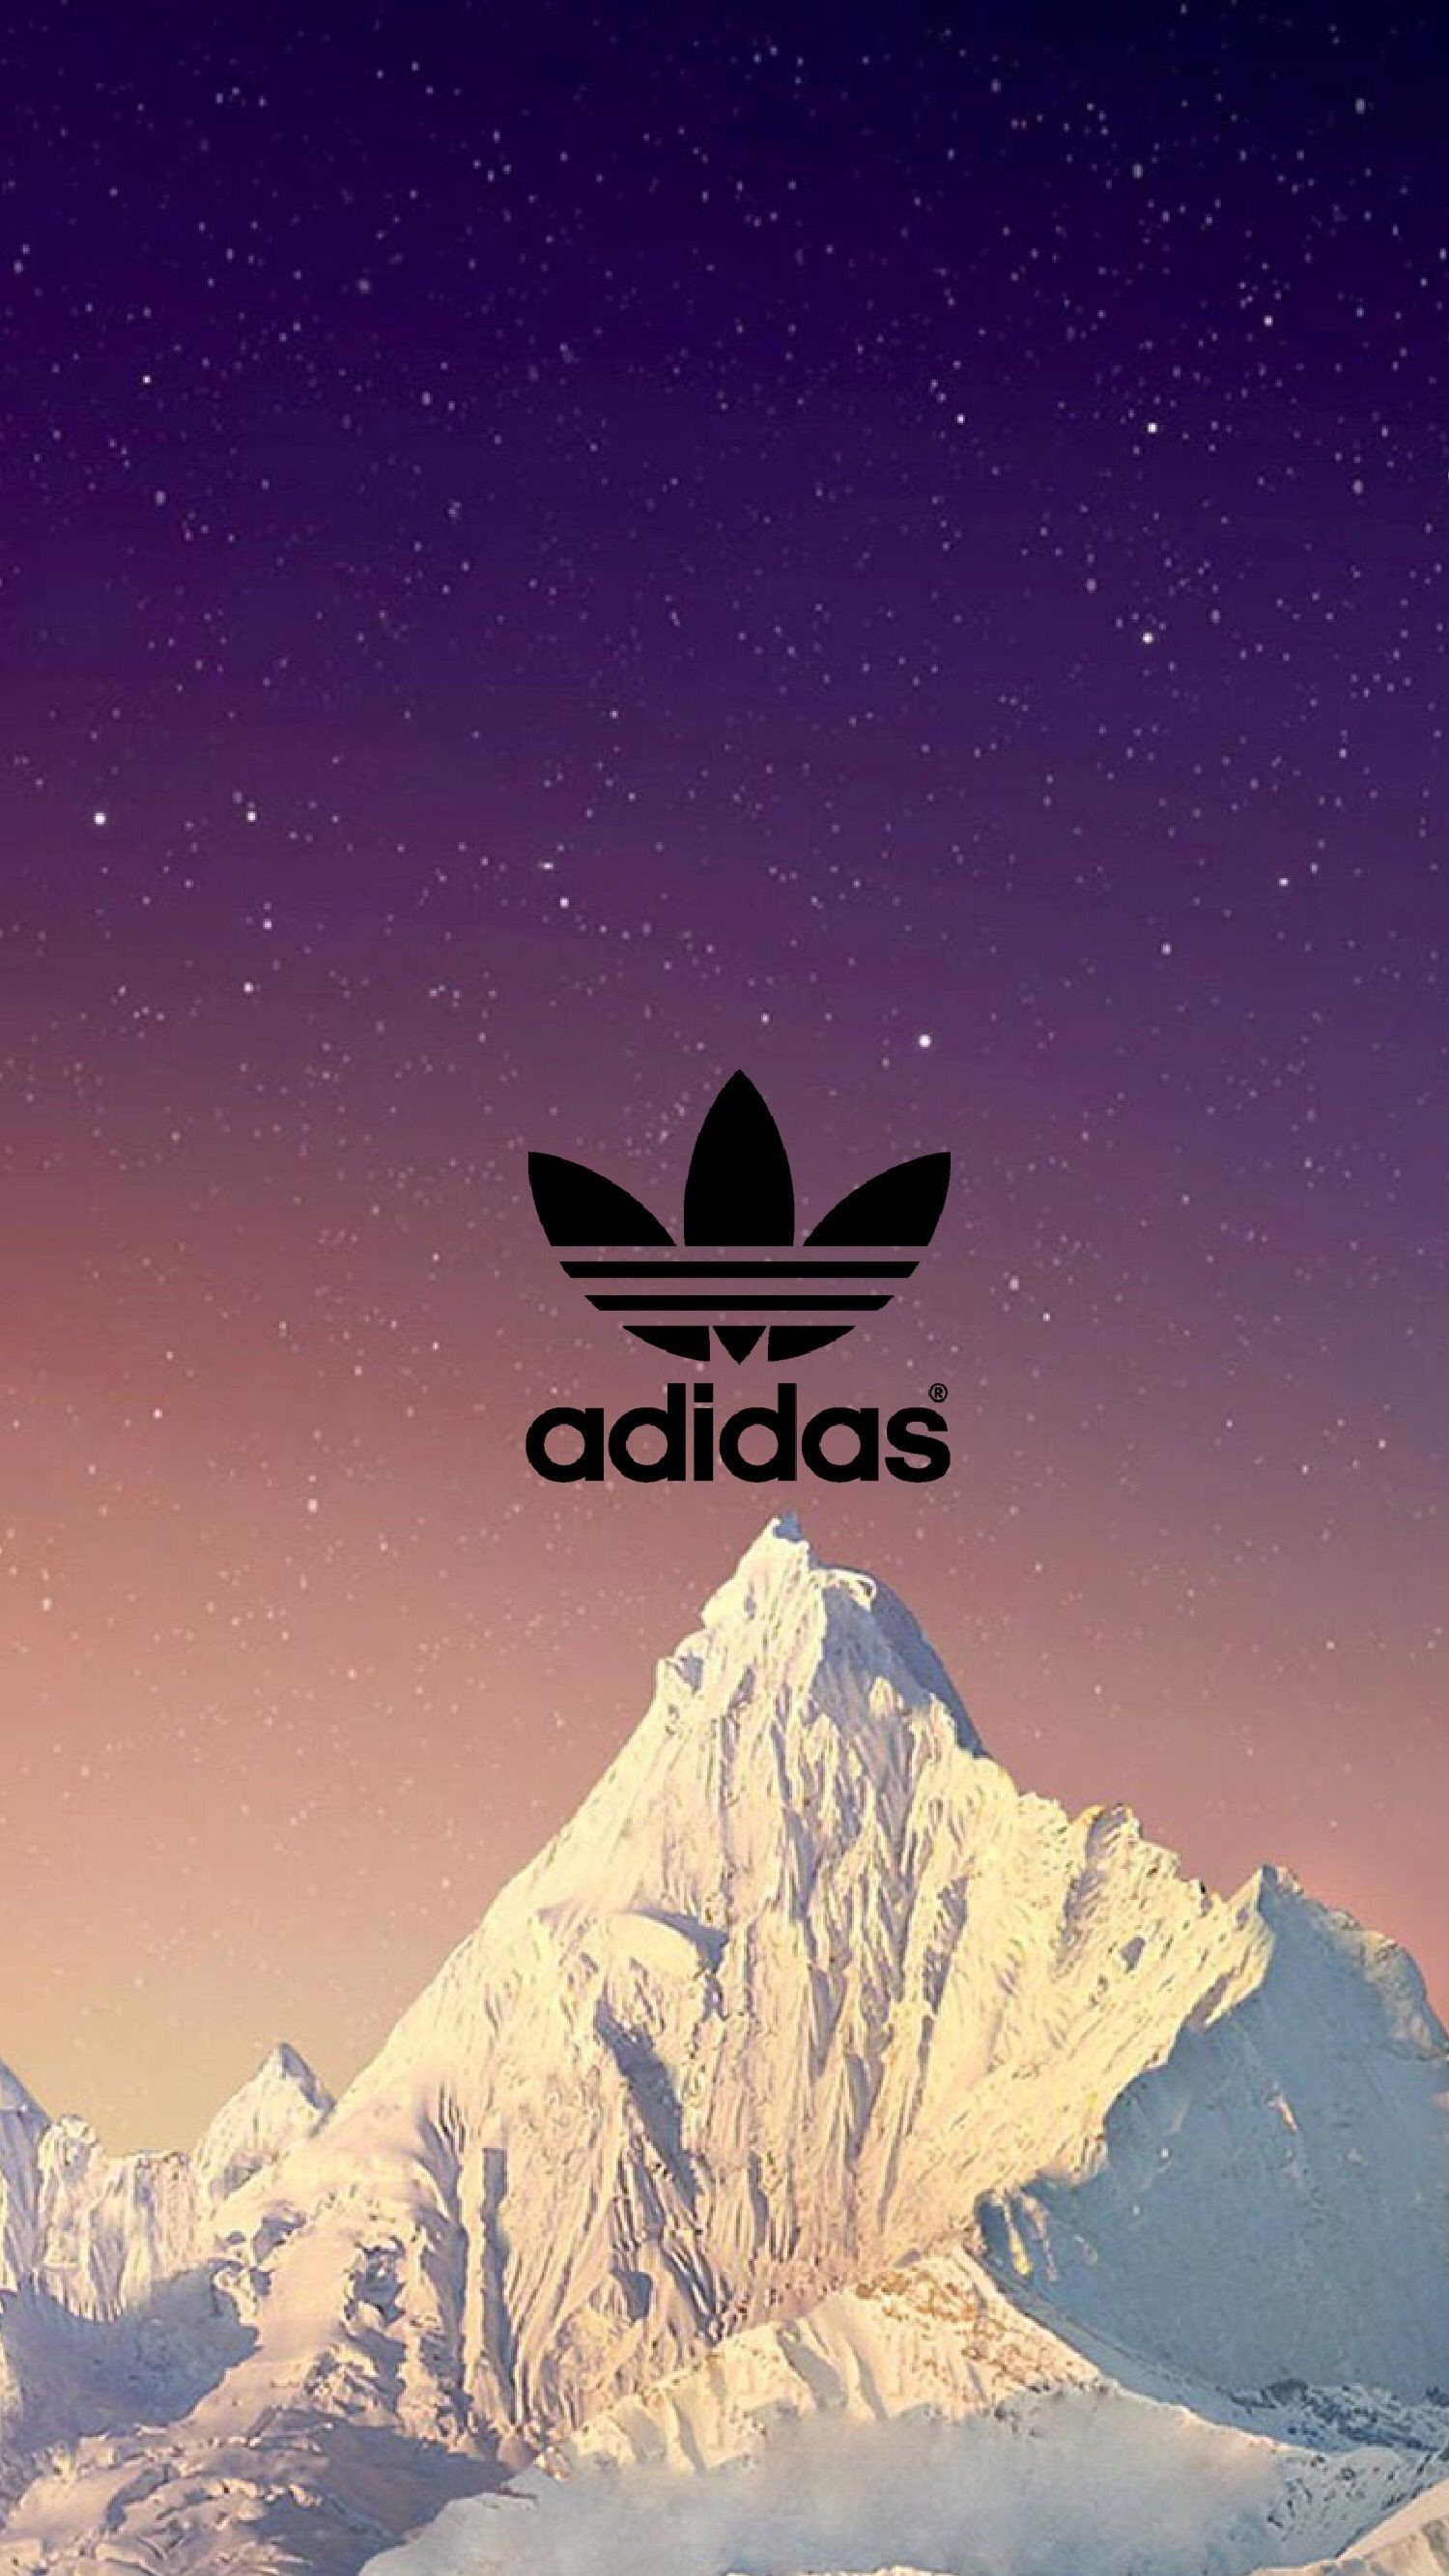 52+] Adidas Wallpapers for iPhone on